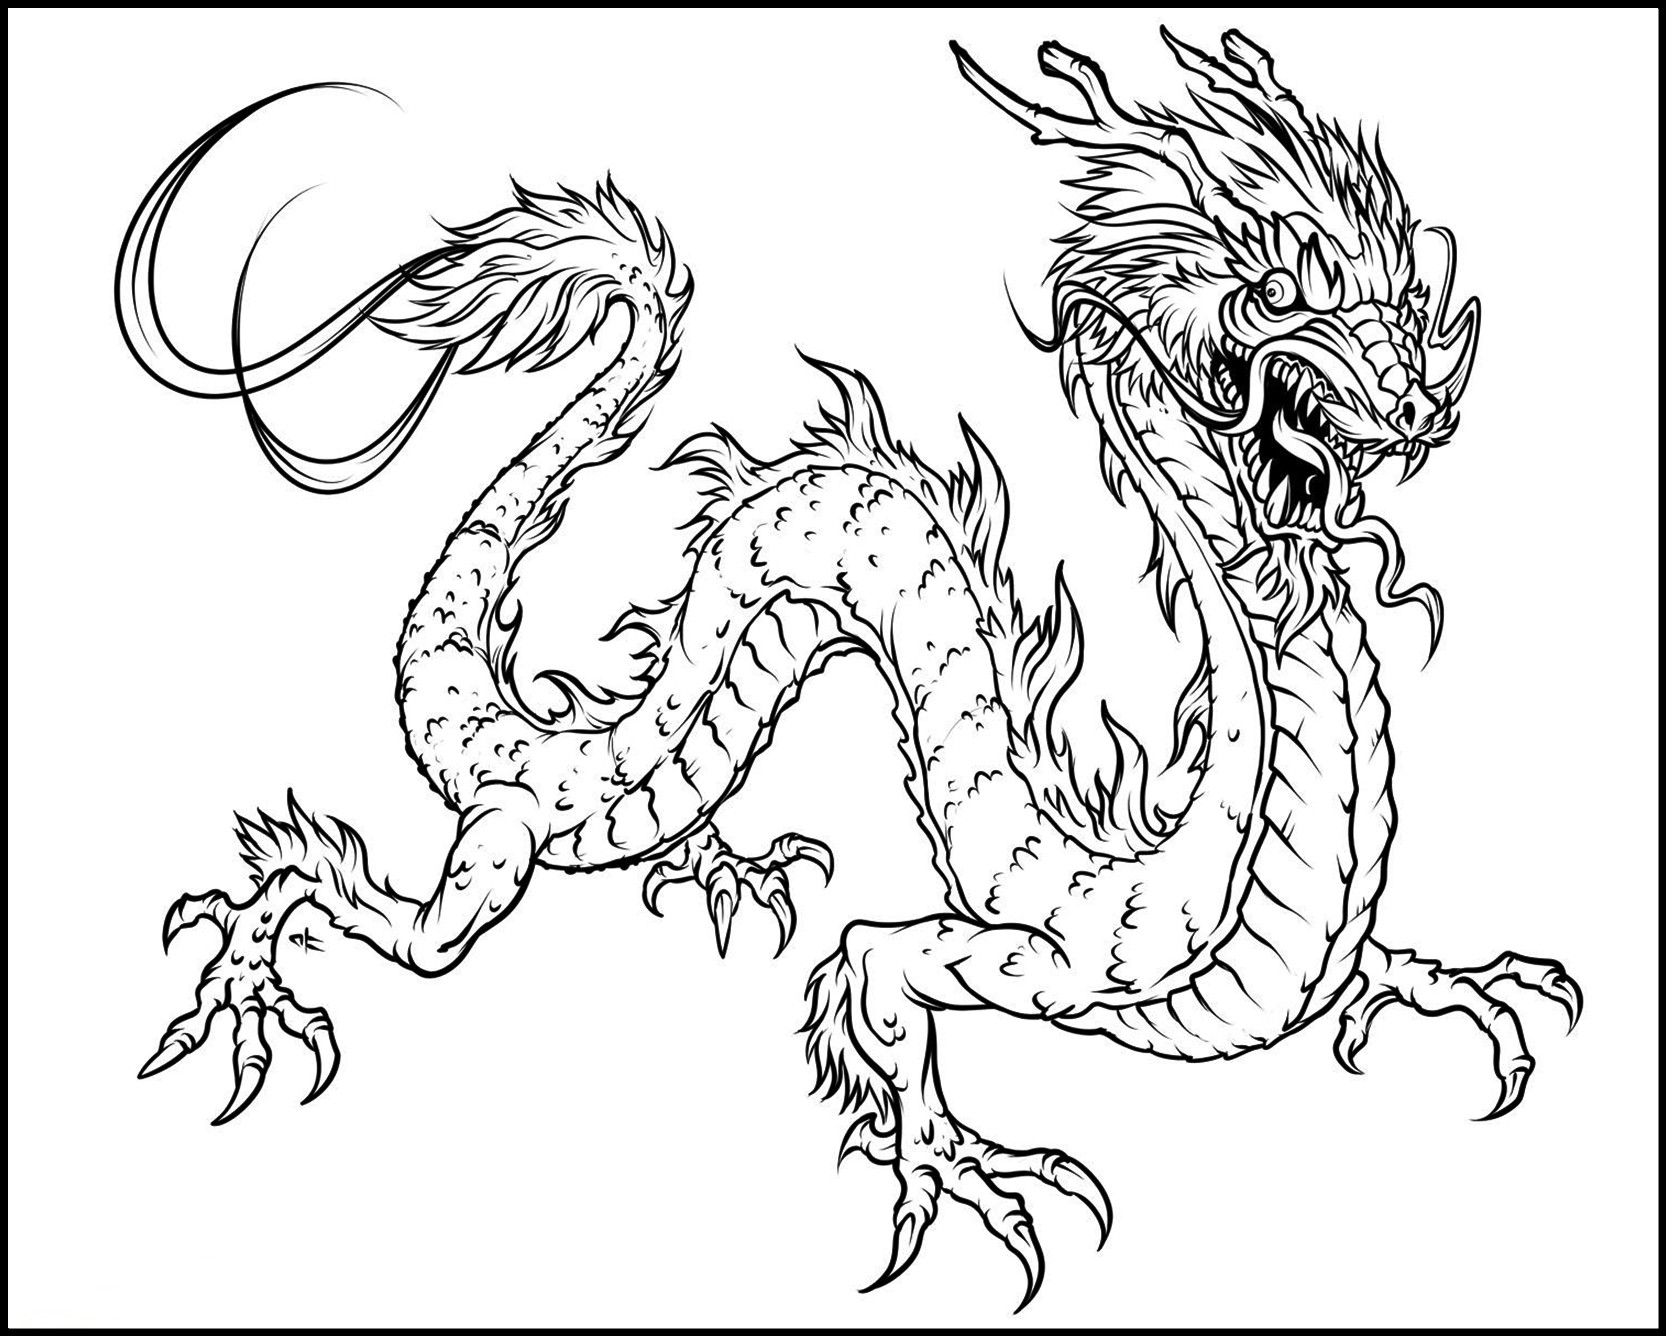 China S Dragon Coloring Page Free Printable Coloring Pages For Kids